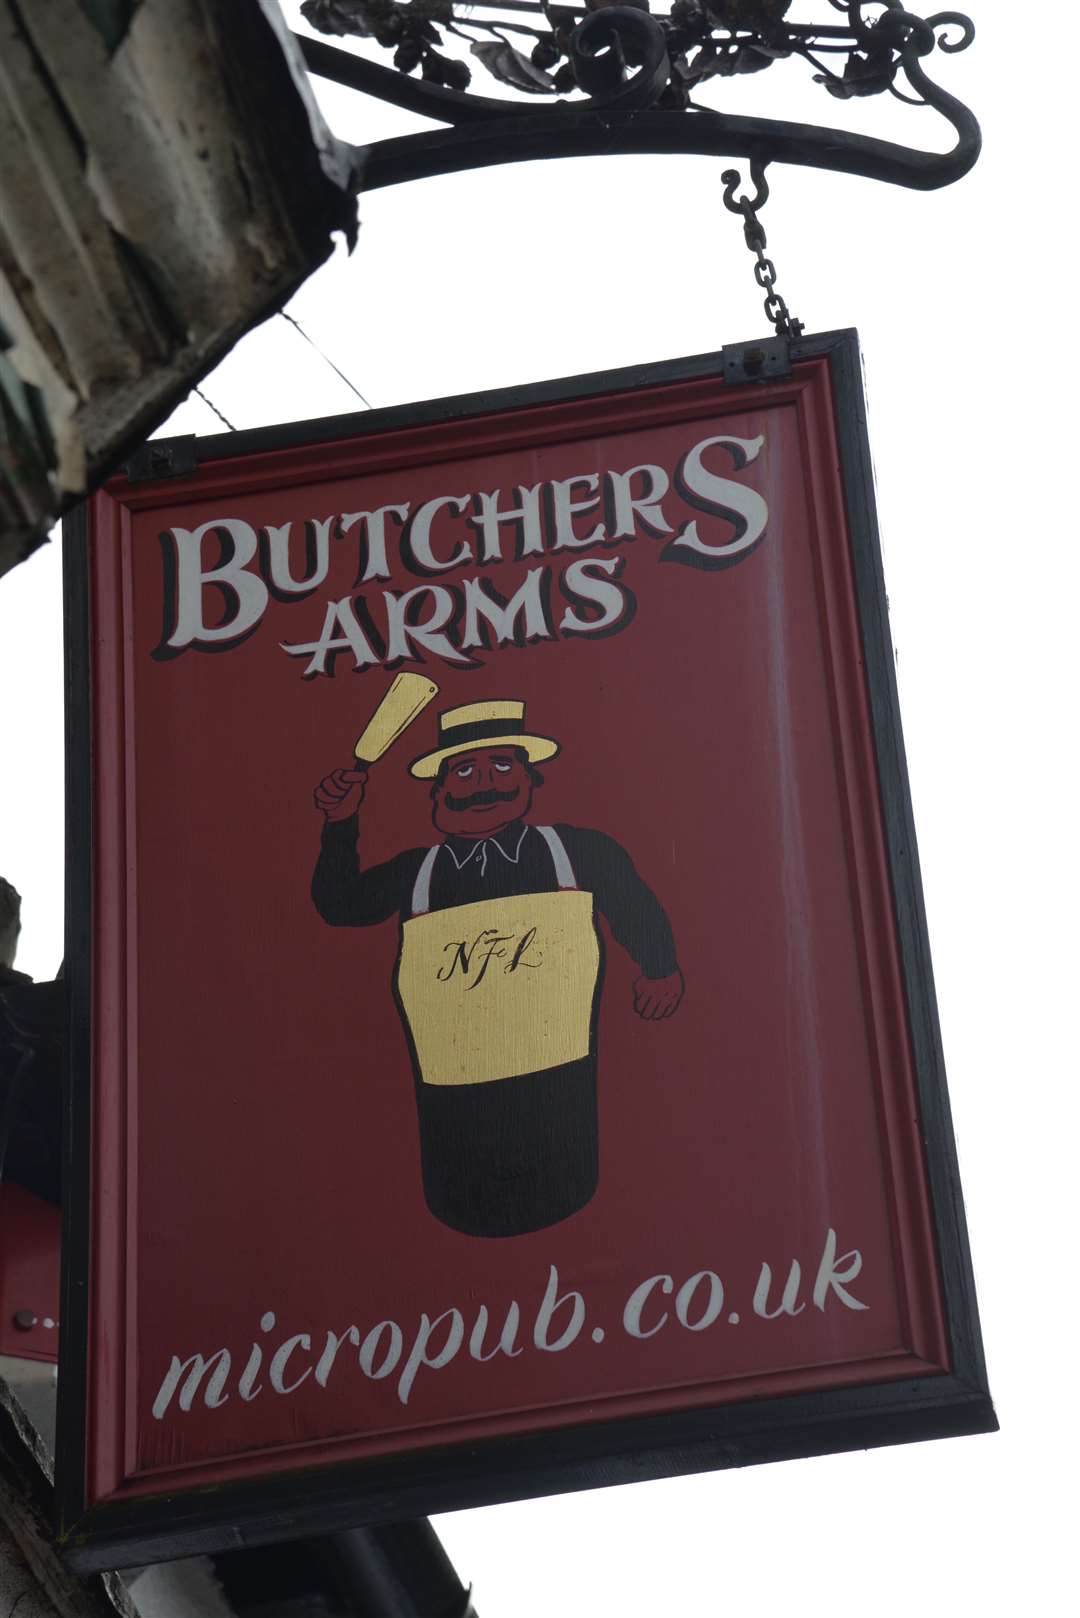 A photo of the outside of the pub when it celebrated its 10th anniversary in 2015